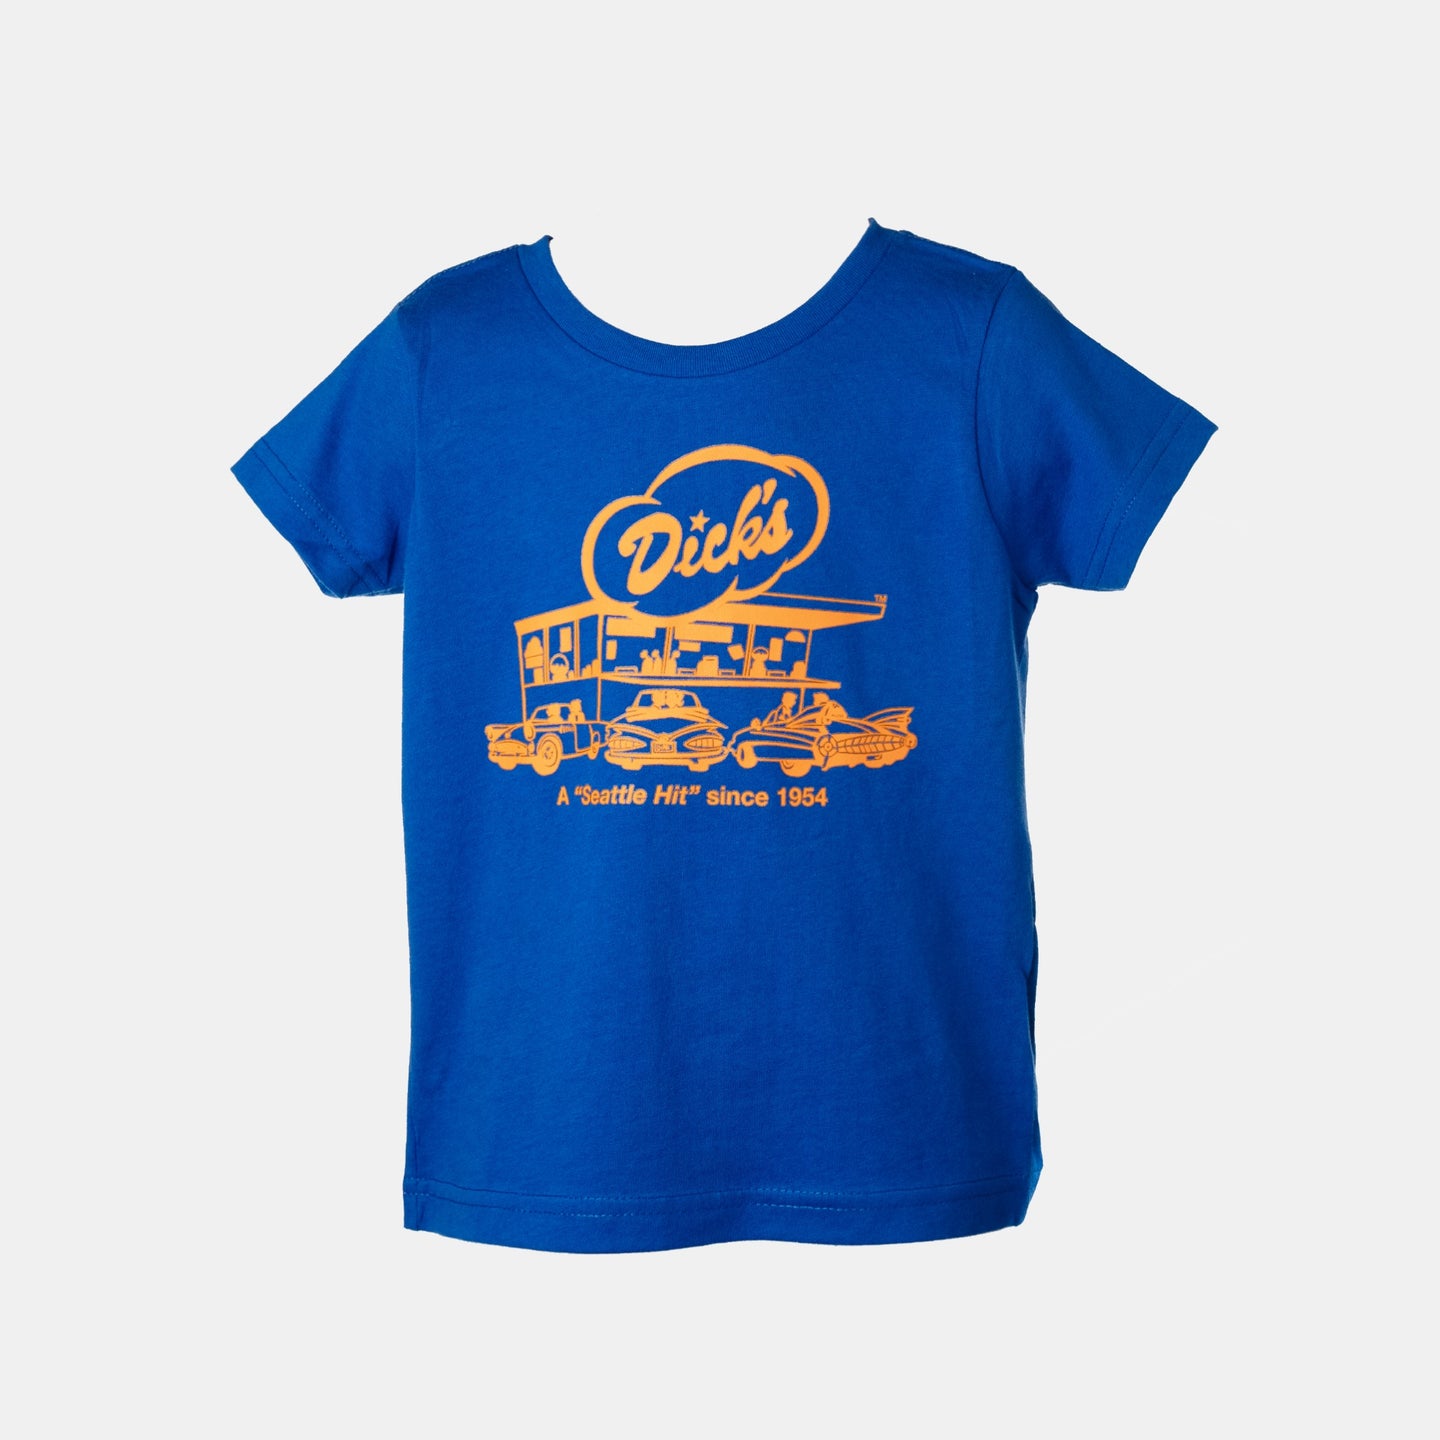 Royal blue t-shirt with orange Dick's Drive-In classic restaurant logo graphic & 